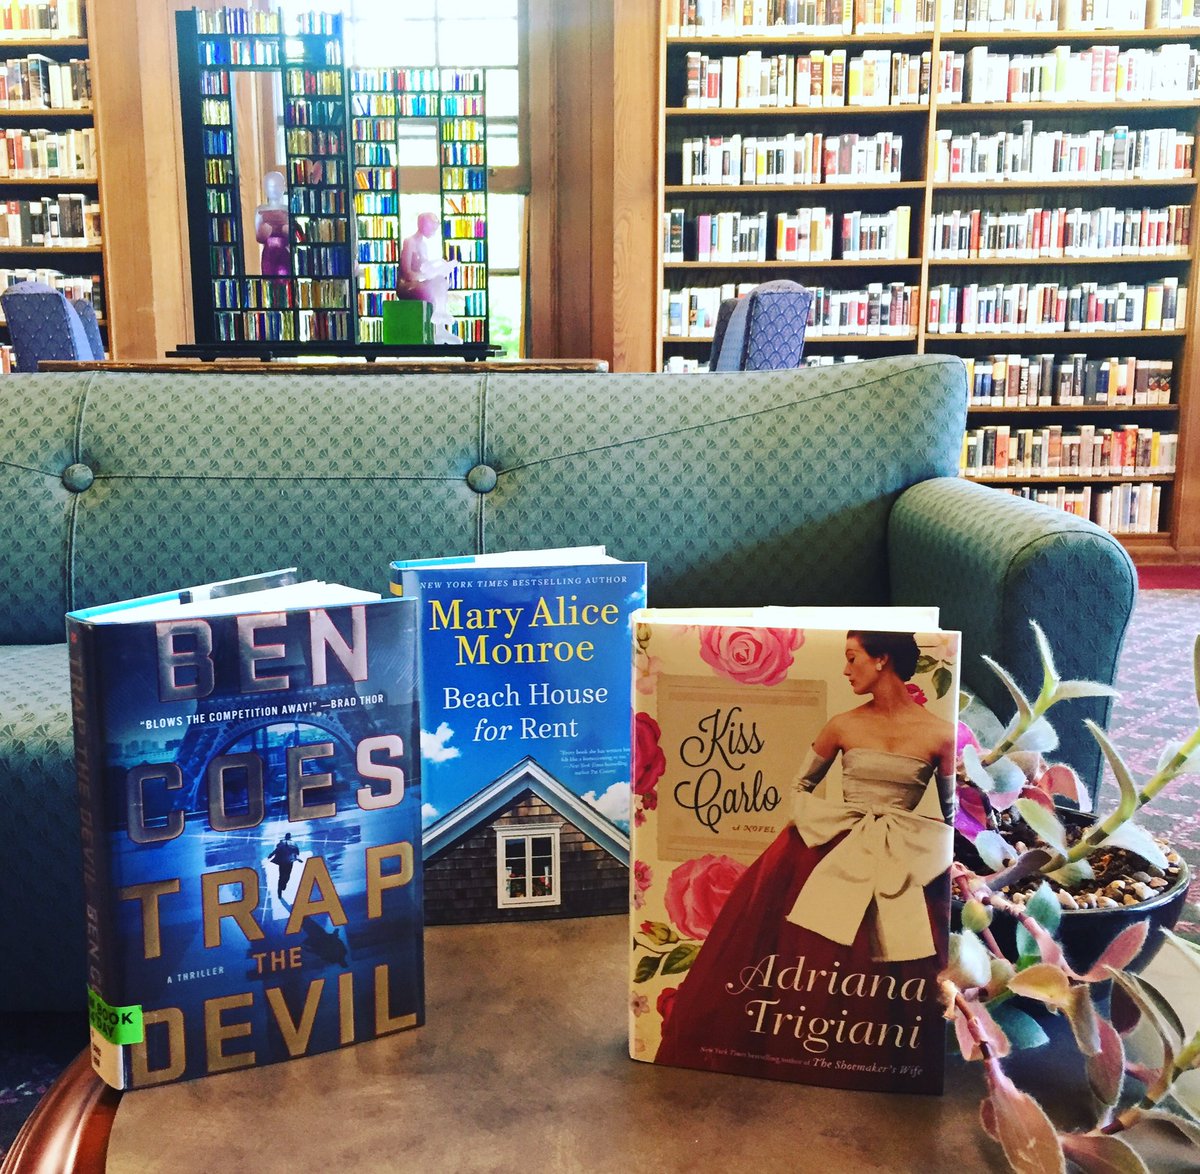 #NewBooks! #BenCoes' #TrapTheDevil, @MaryAliceMonroe's #BeachHouseForRent, and @AdrianaTrigiani's #KissCarlo are today's features! 😍🙌🏼☕️📖📚